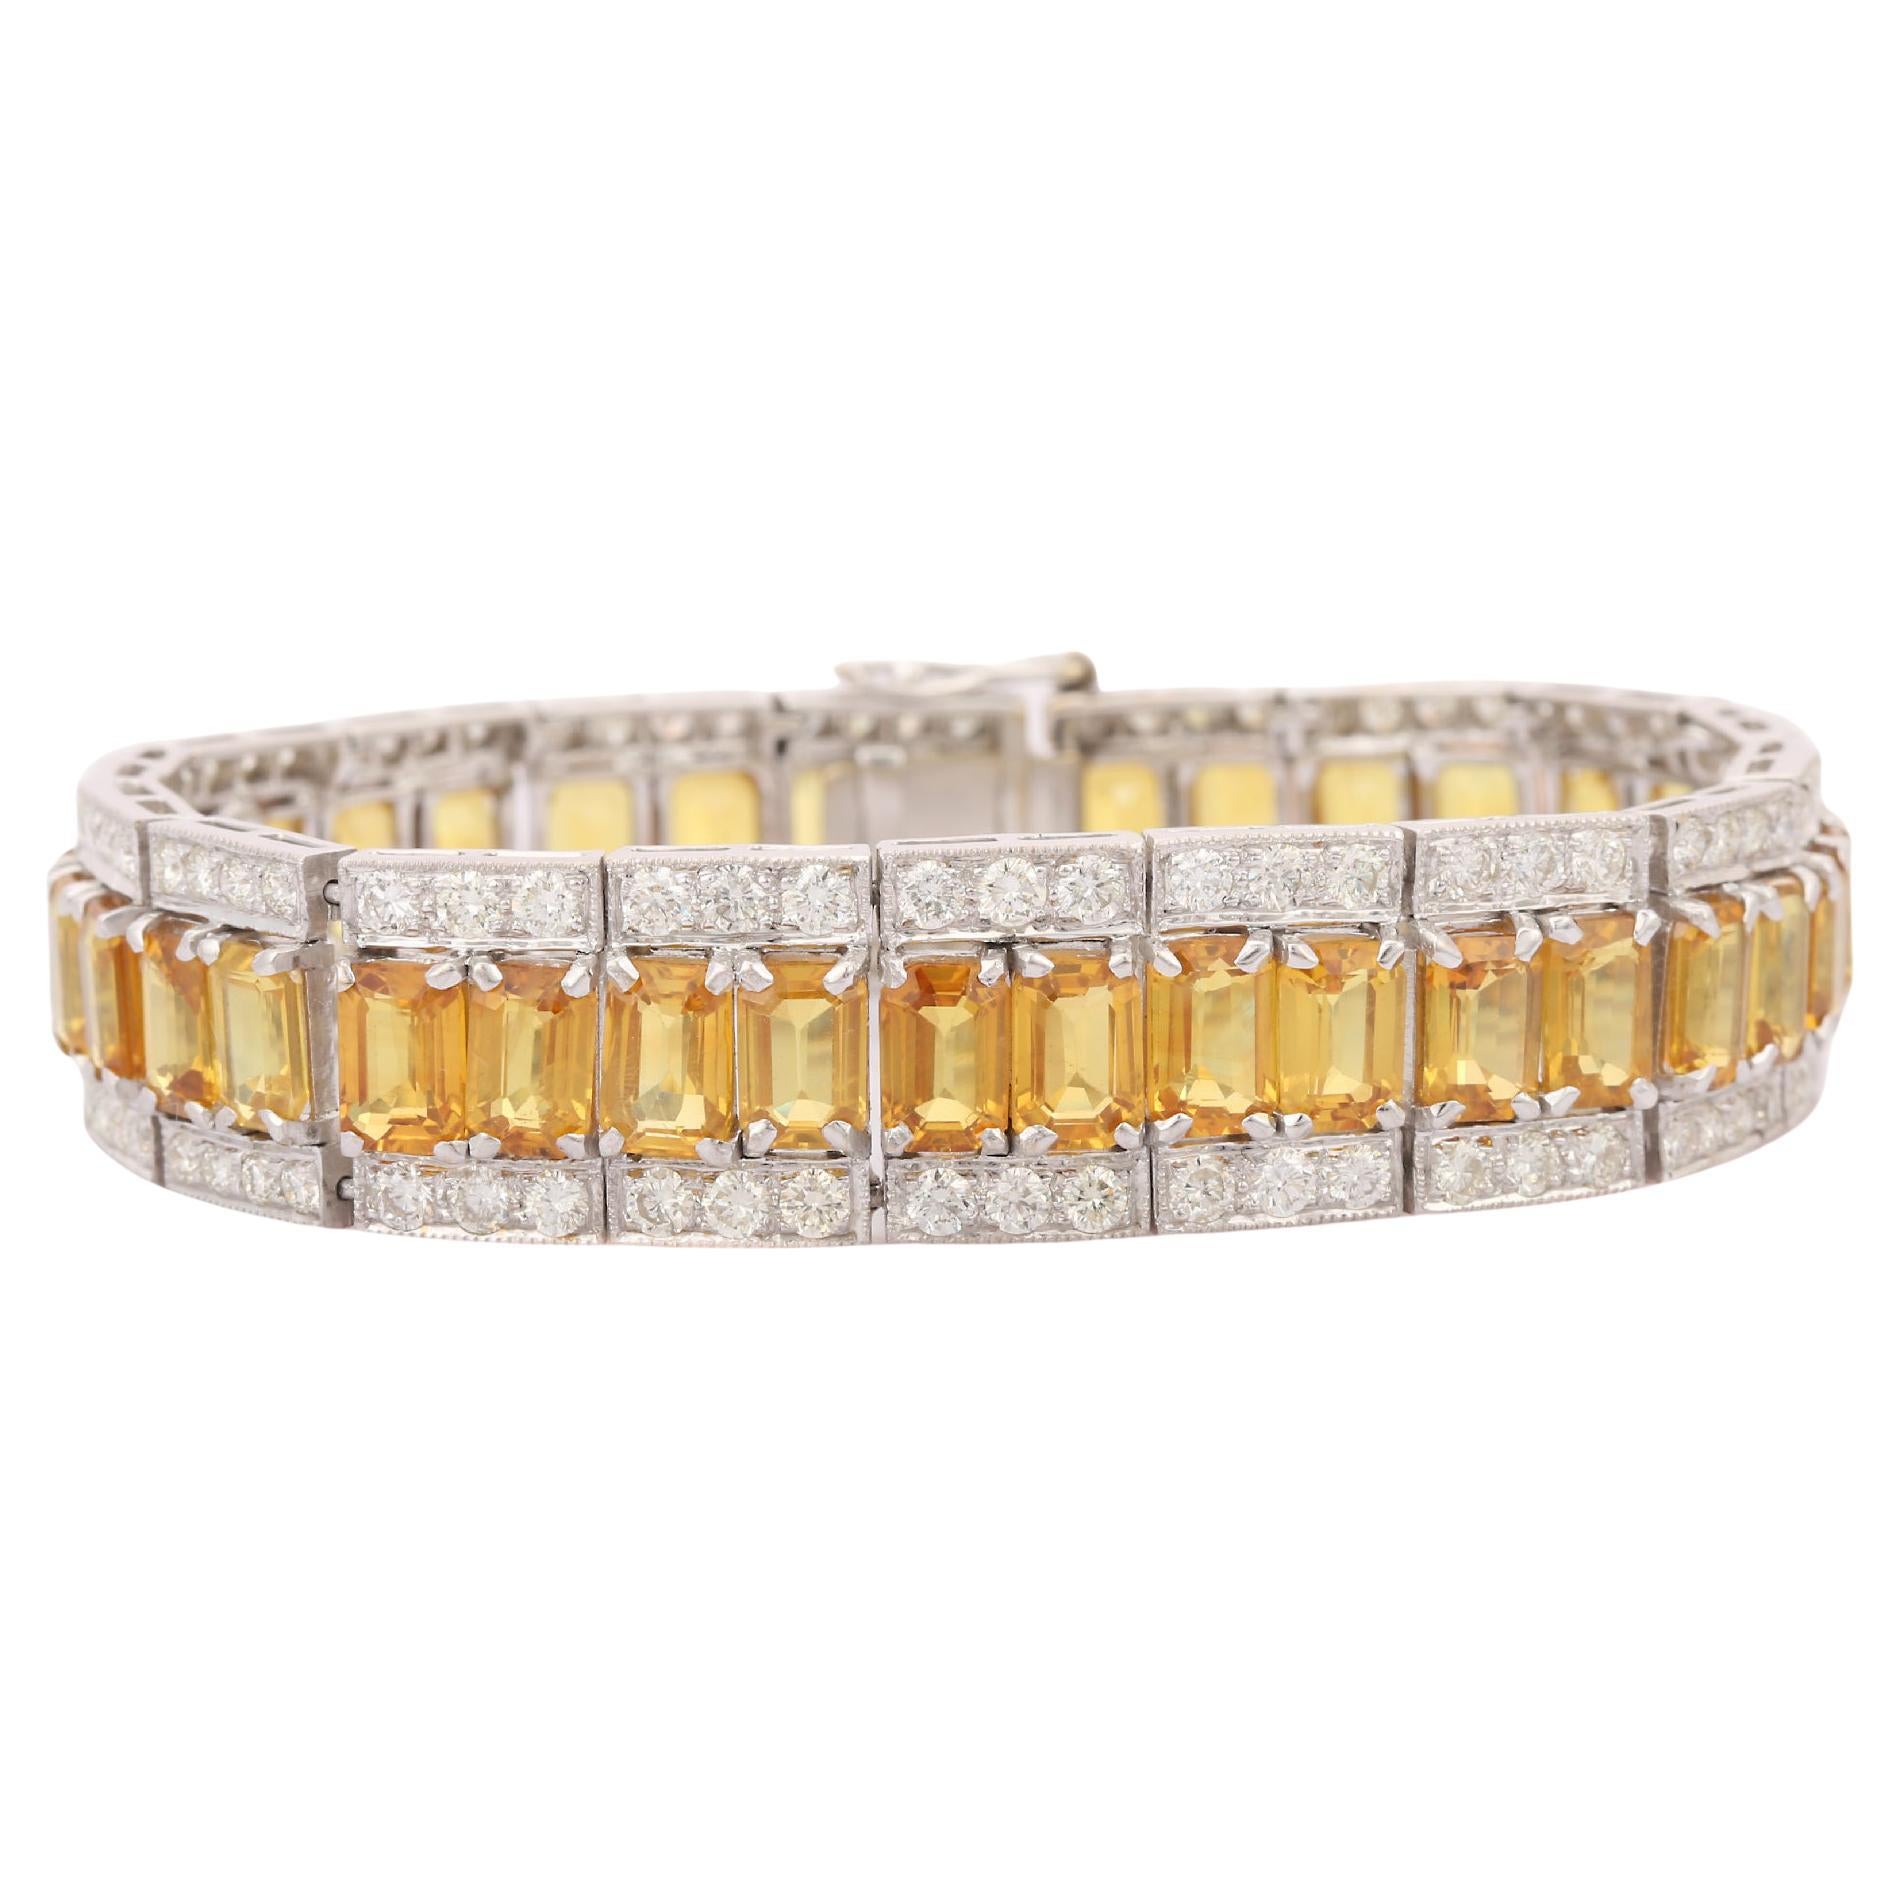 Natural 37.87 Ct Yellow Sapphire 5.34 Ct Diamond Bracelet 18kt Solid White Gold